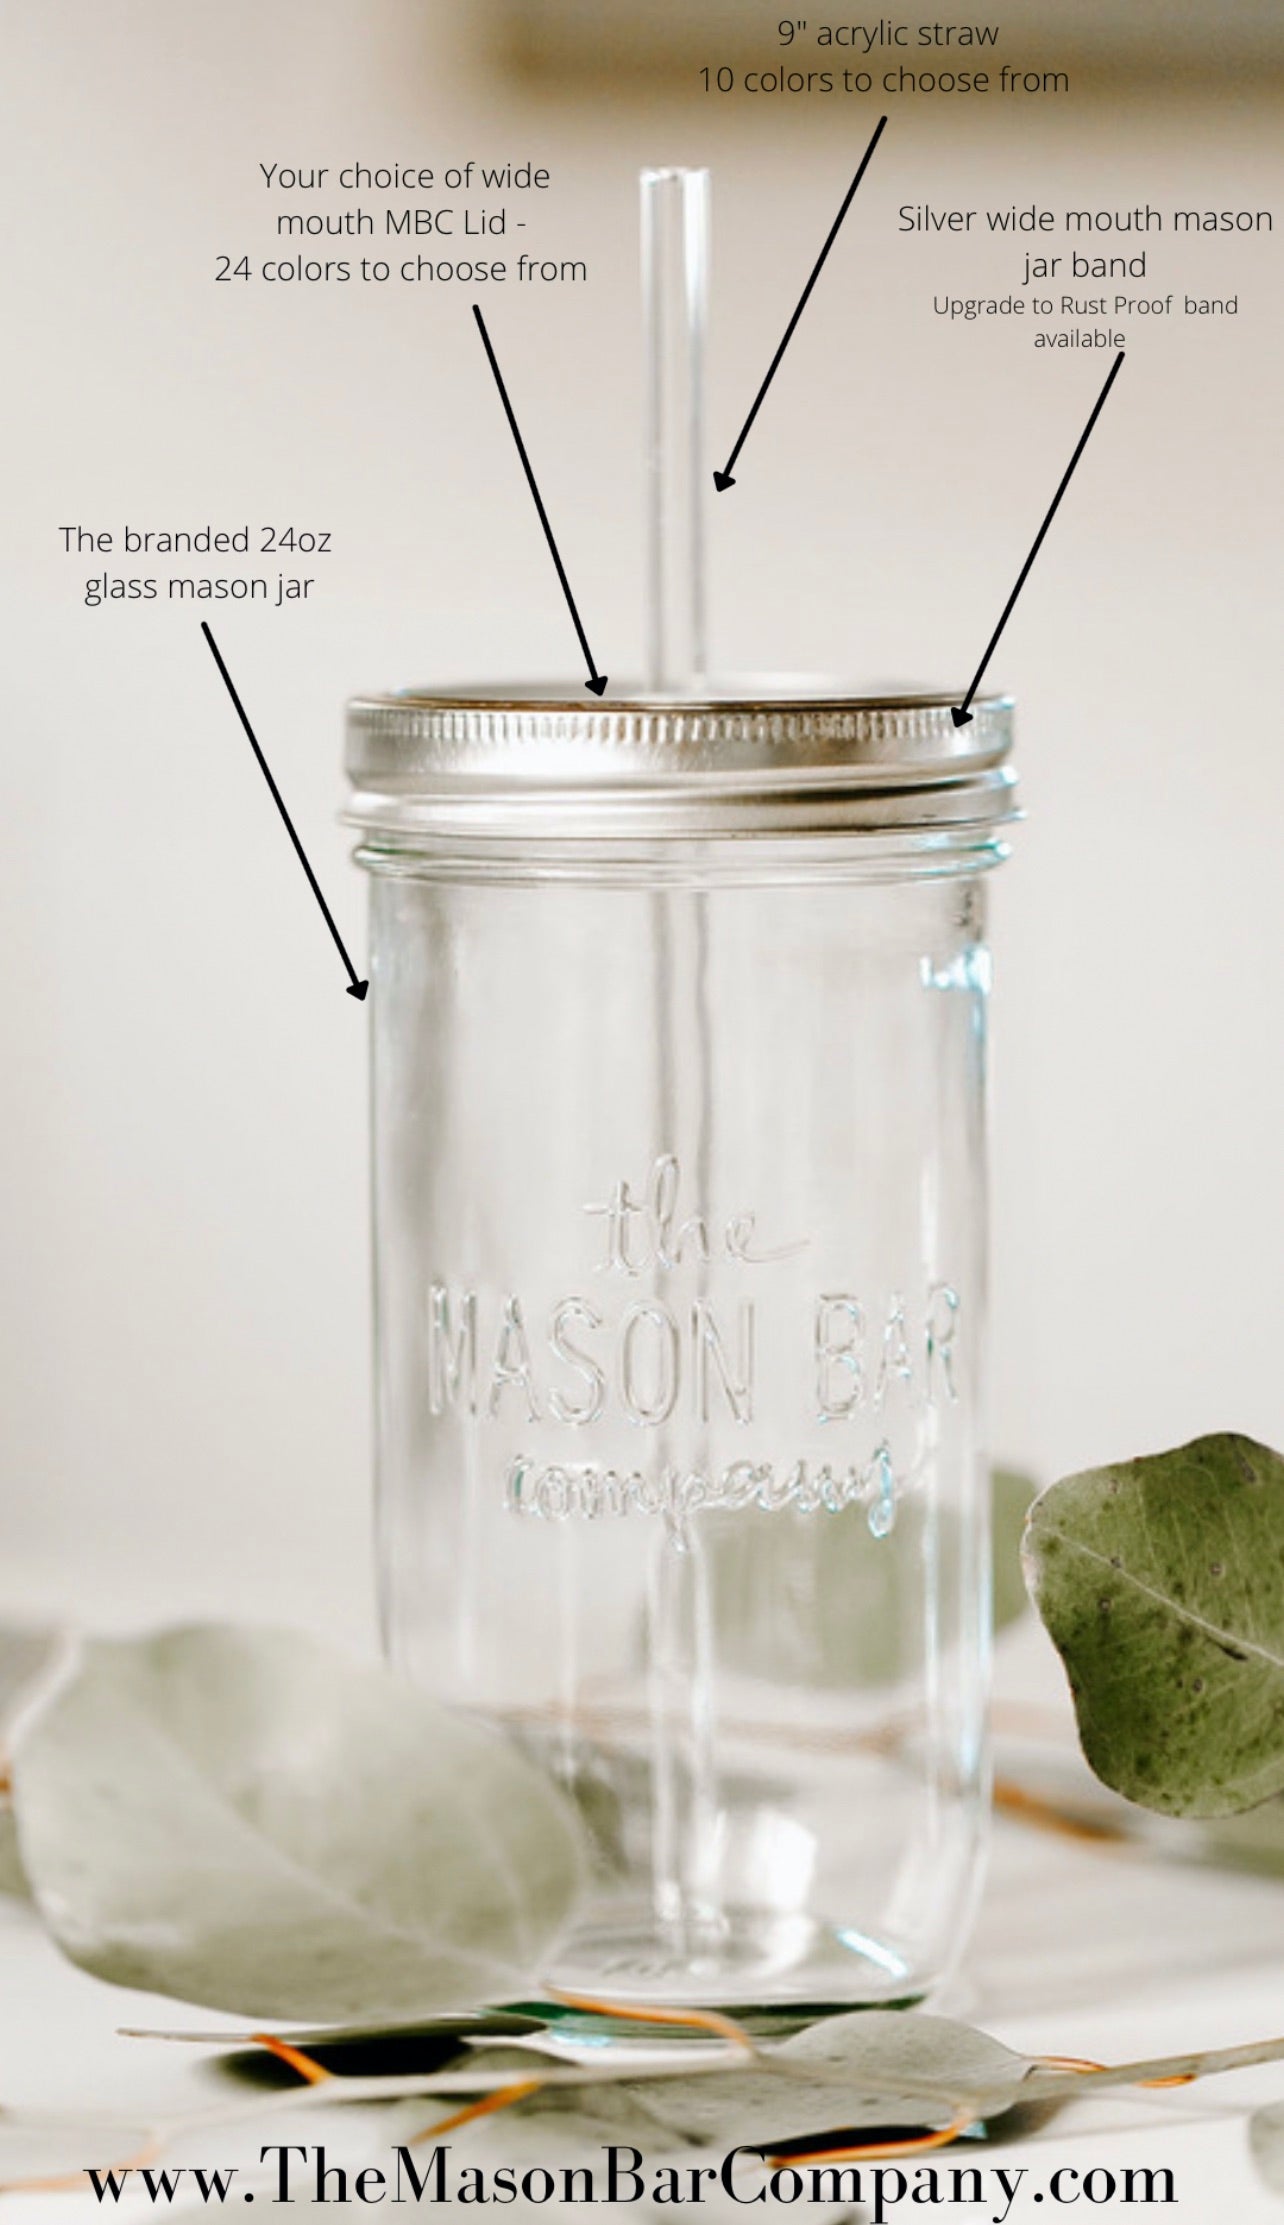 Our 24oz Mason Jar - What question do I get asked the most? – The Mason Bar  Company